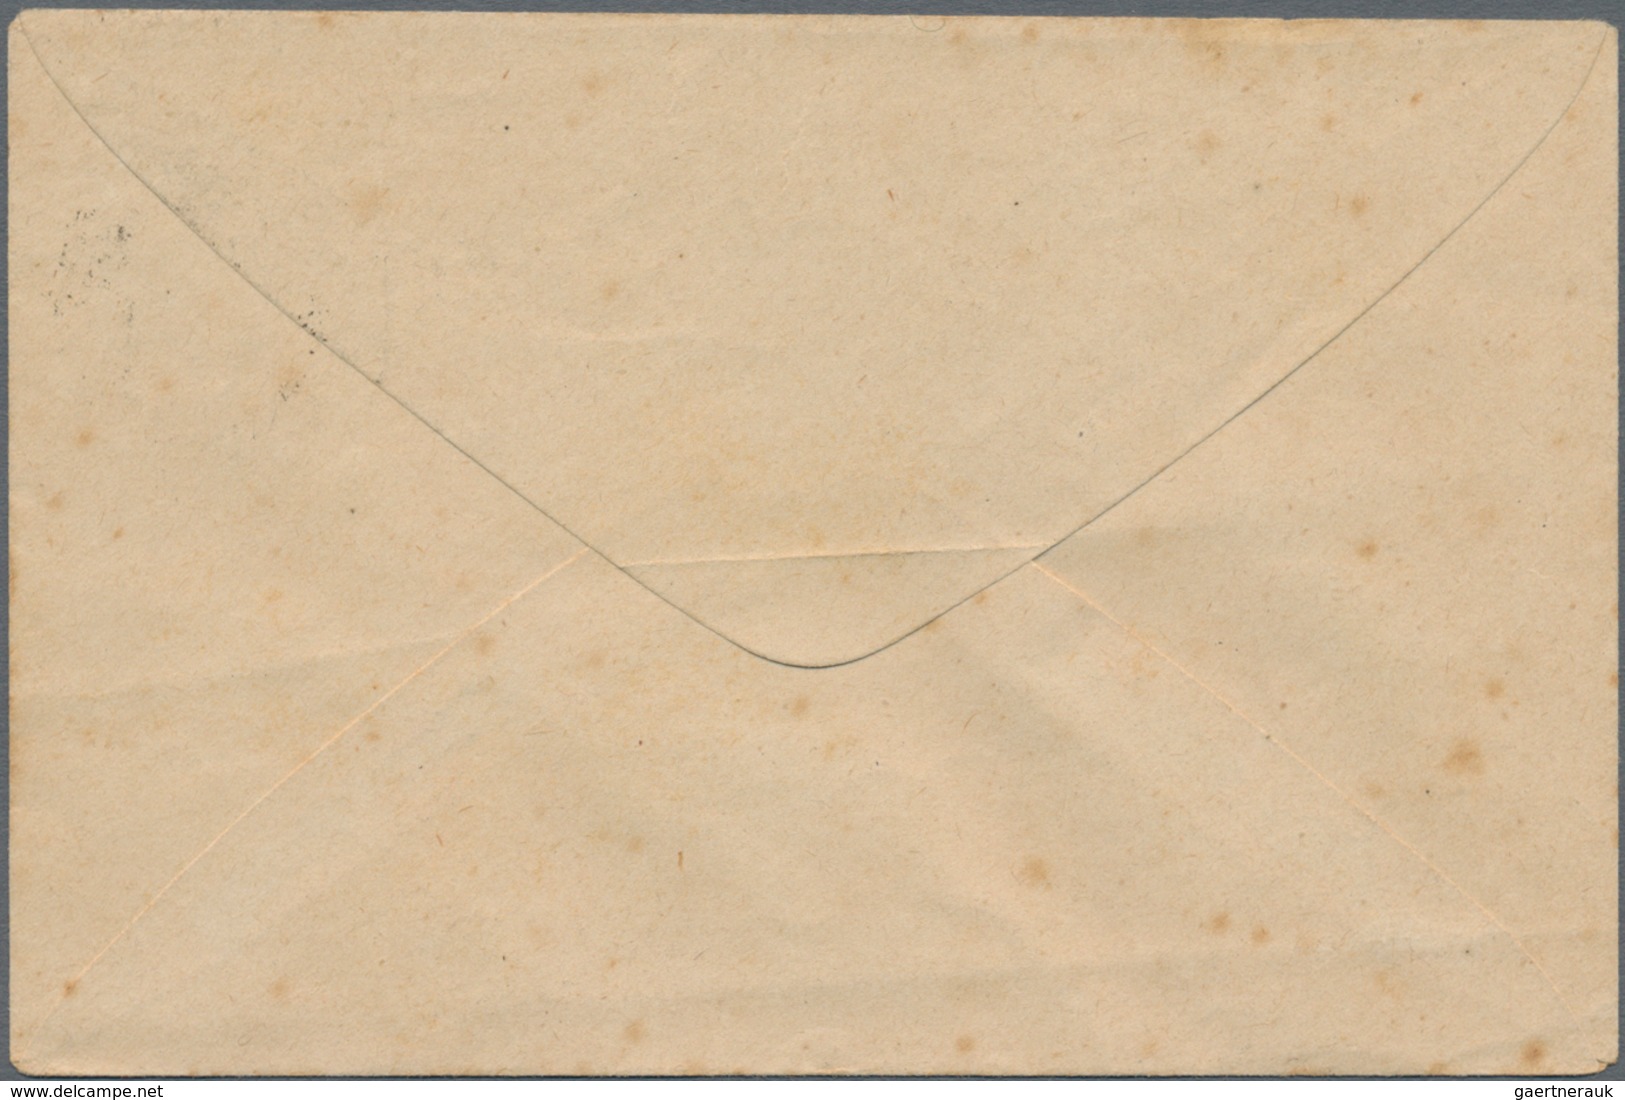 Kambodscha: 1892, Small Size Envelope Type Sage 5 C. Canc. "TAKEO 6 JANV 92" To Chaudoc, Stains. - Cambodia